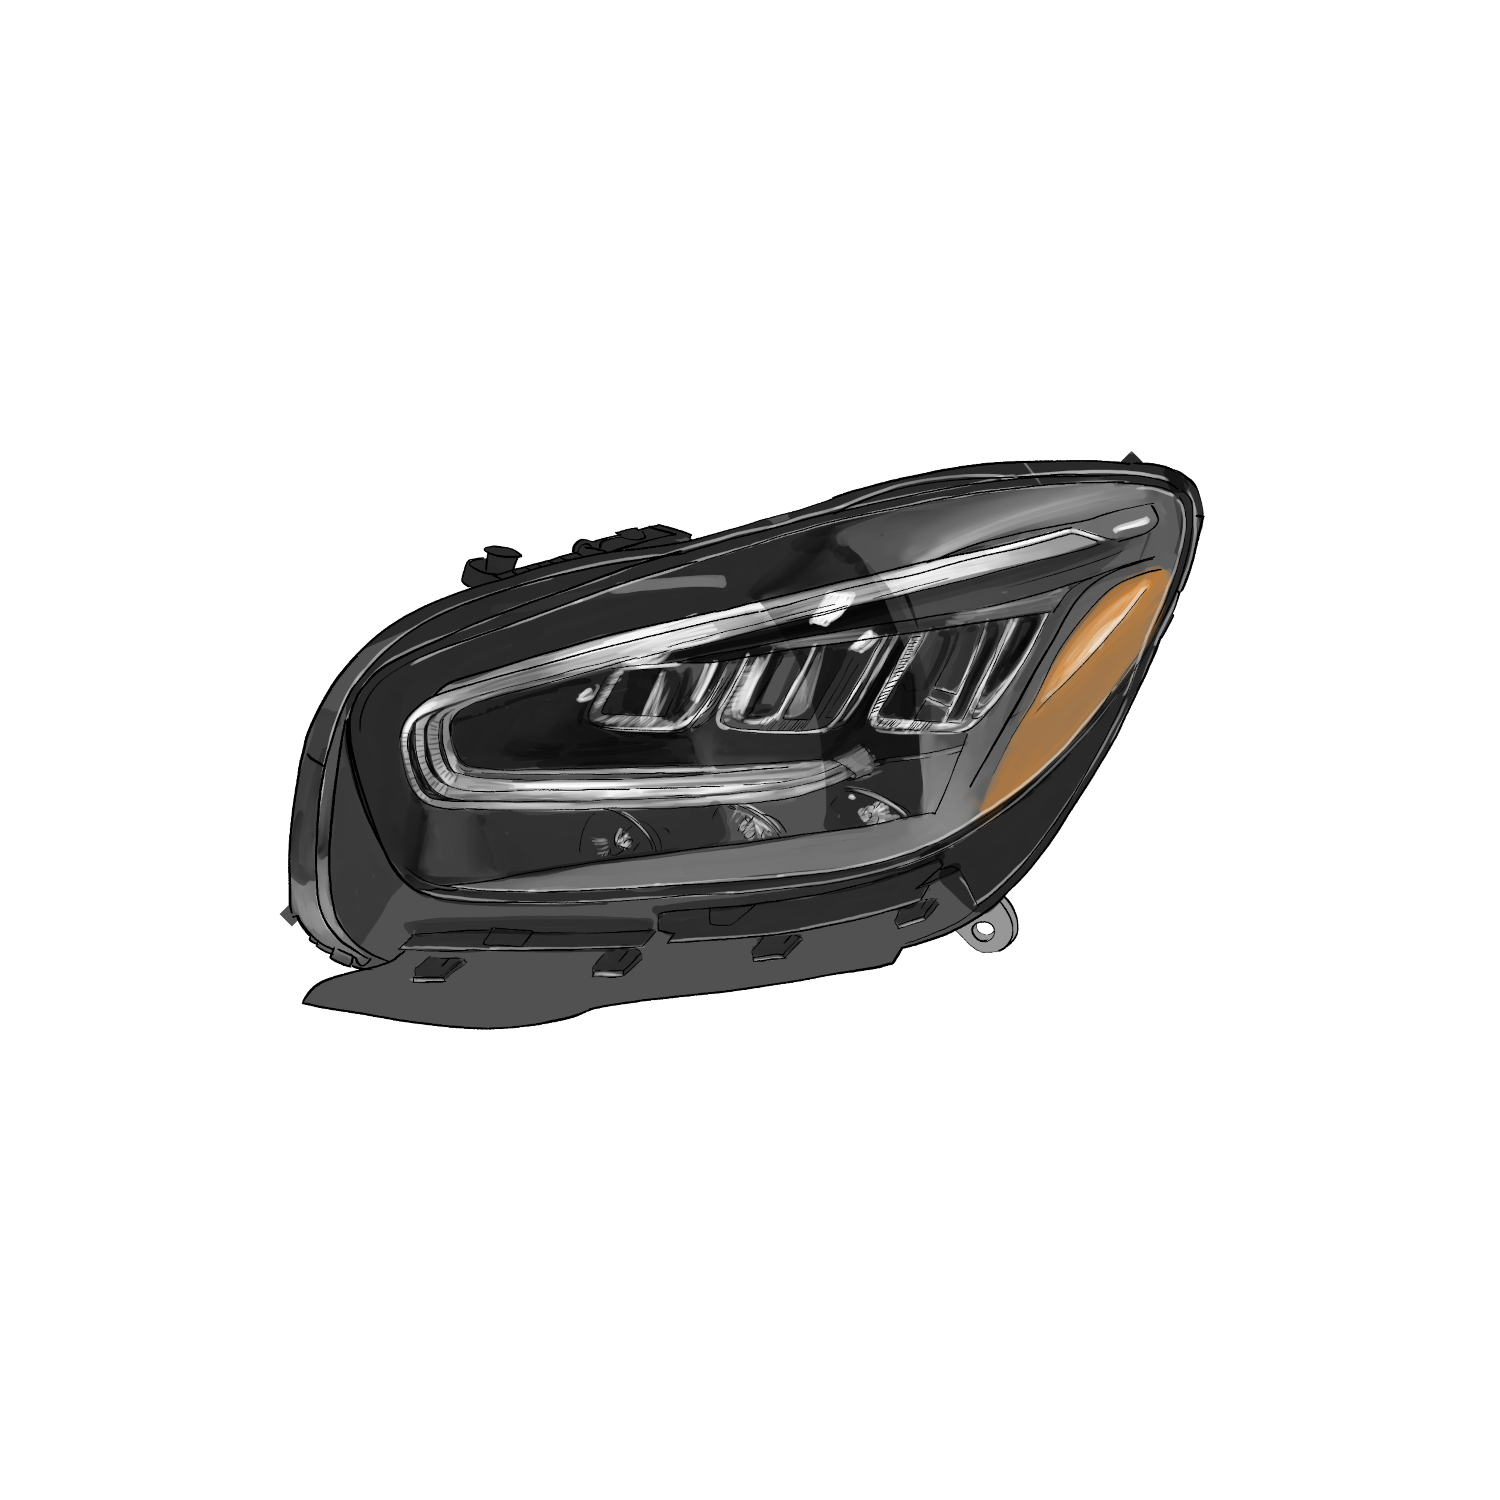  Product image 1 of the product “Headlight OX7 ”